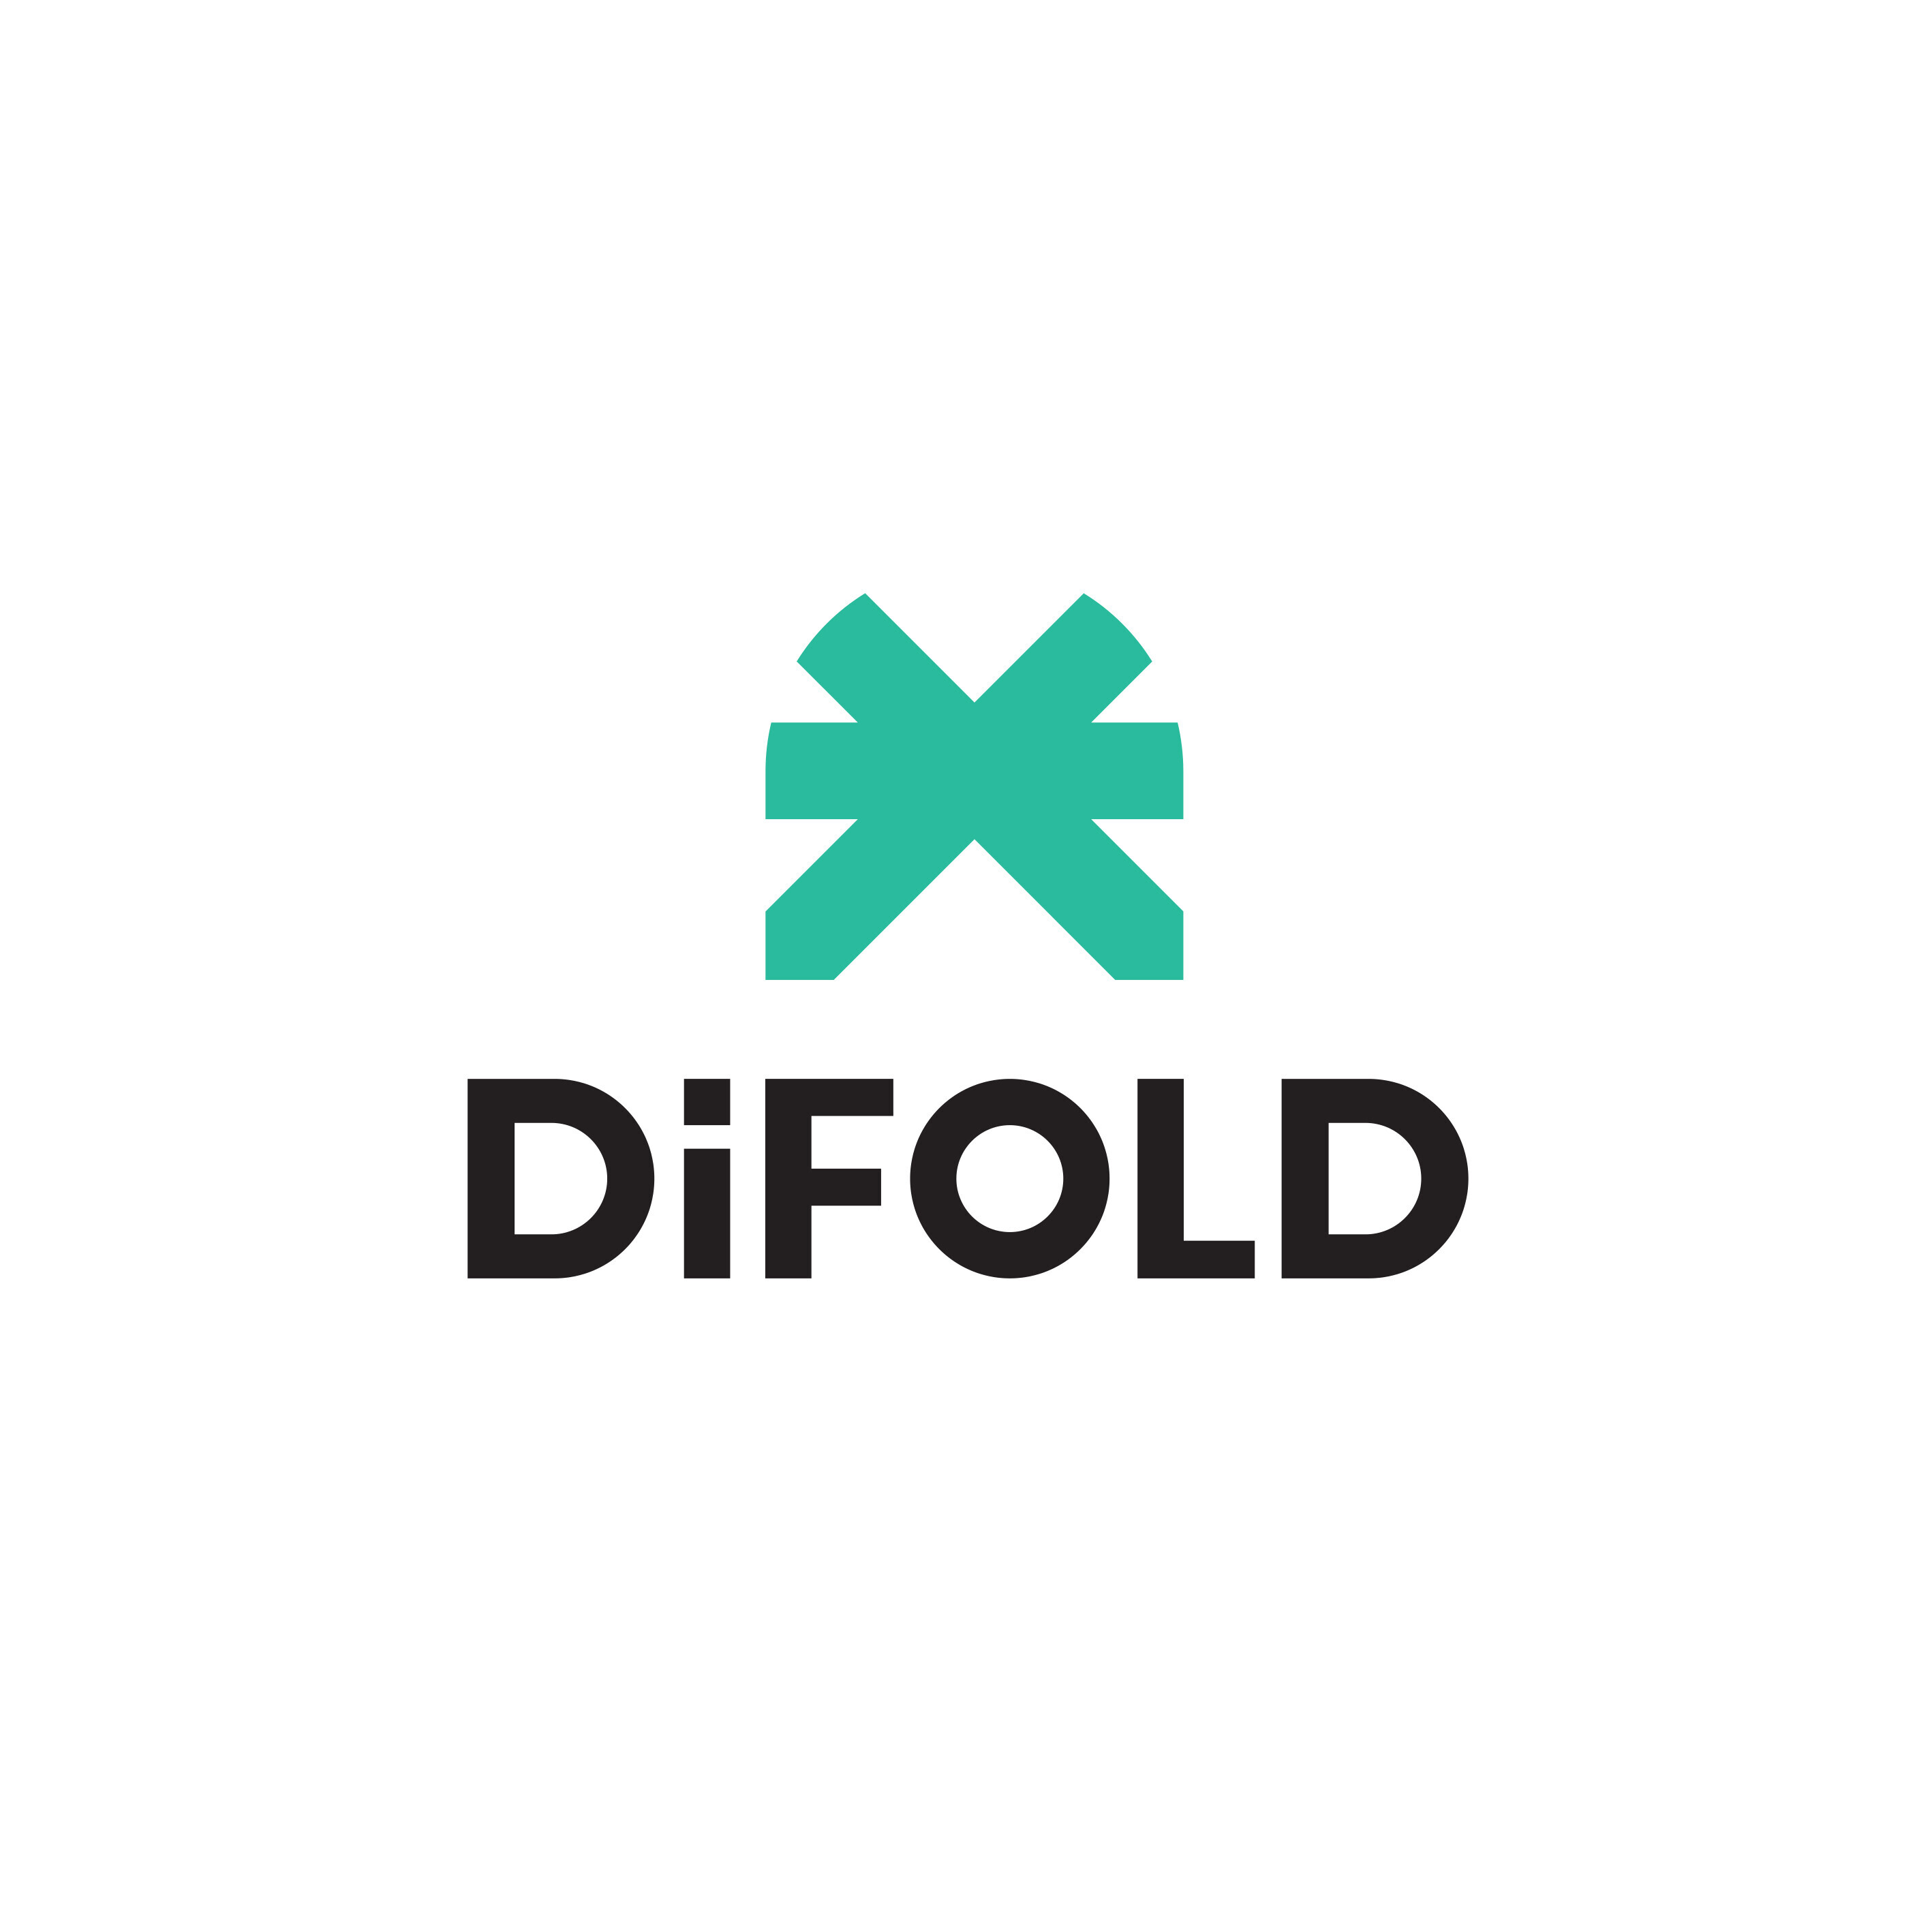 DiFOLD